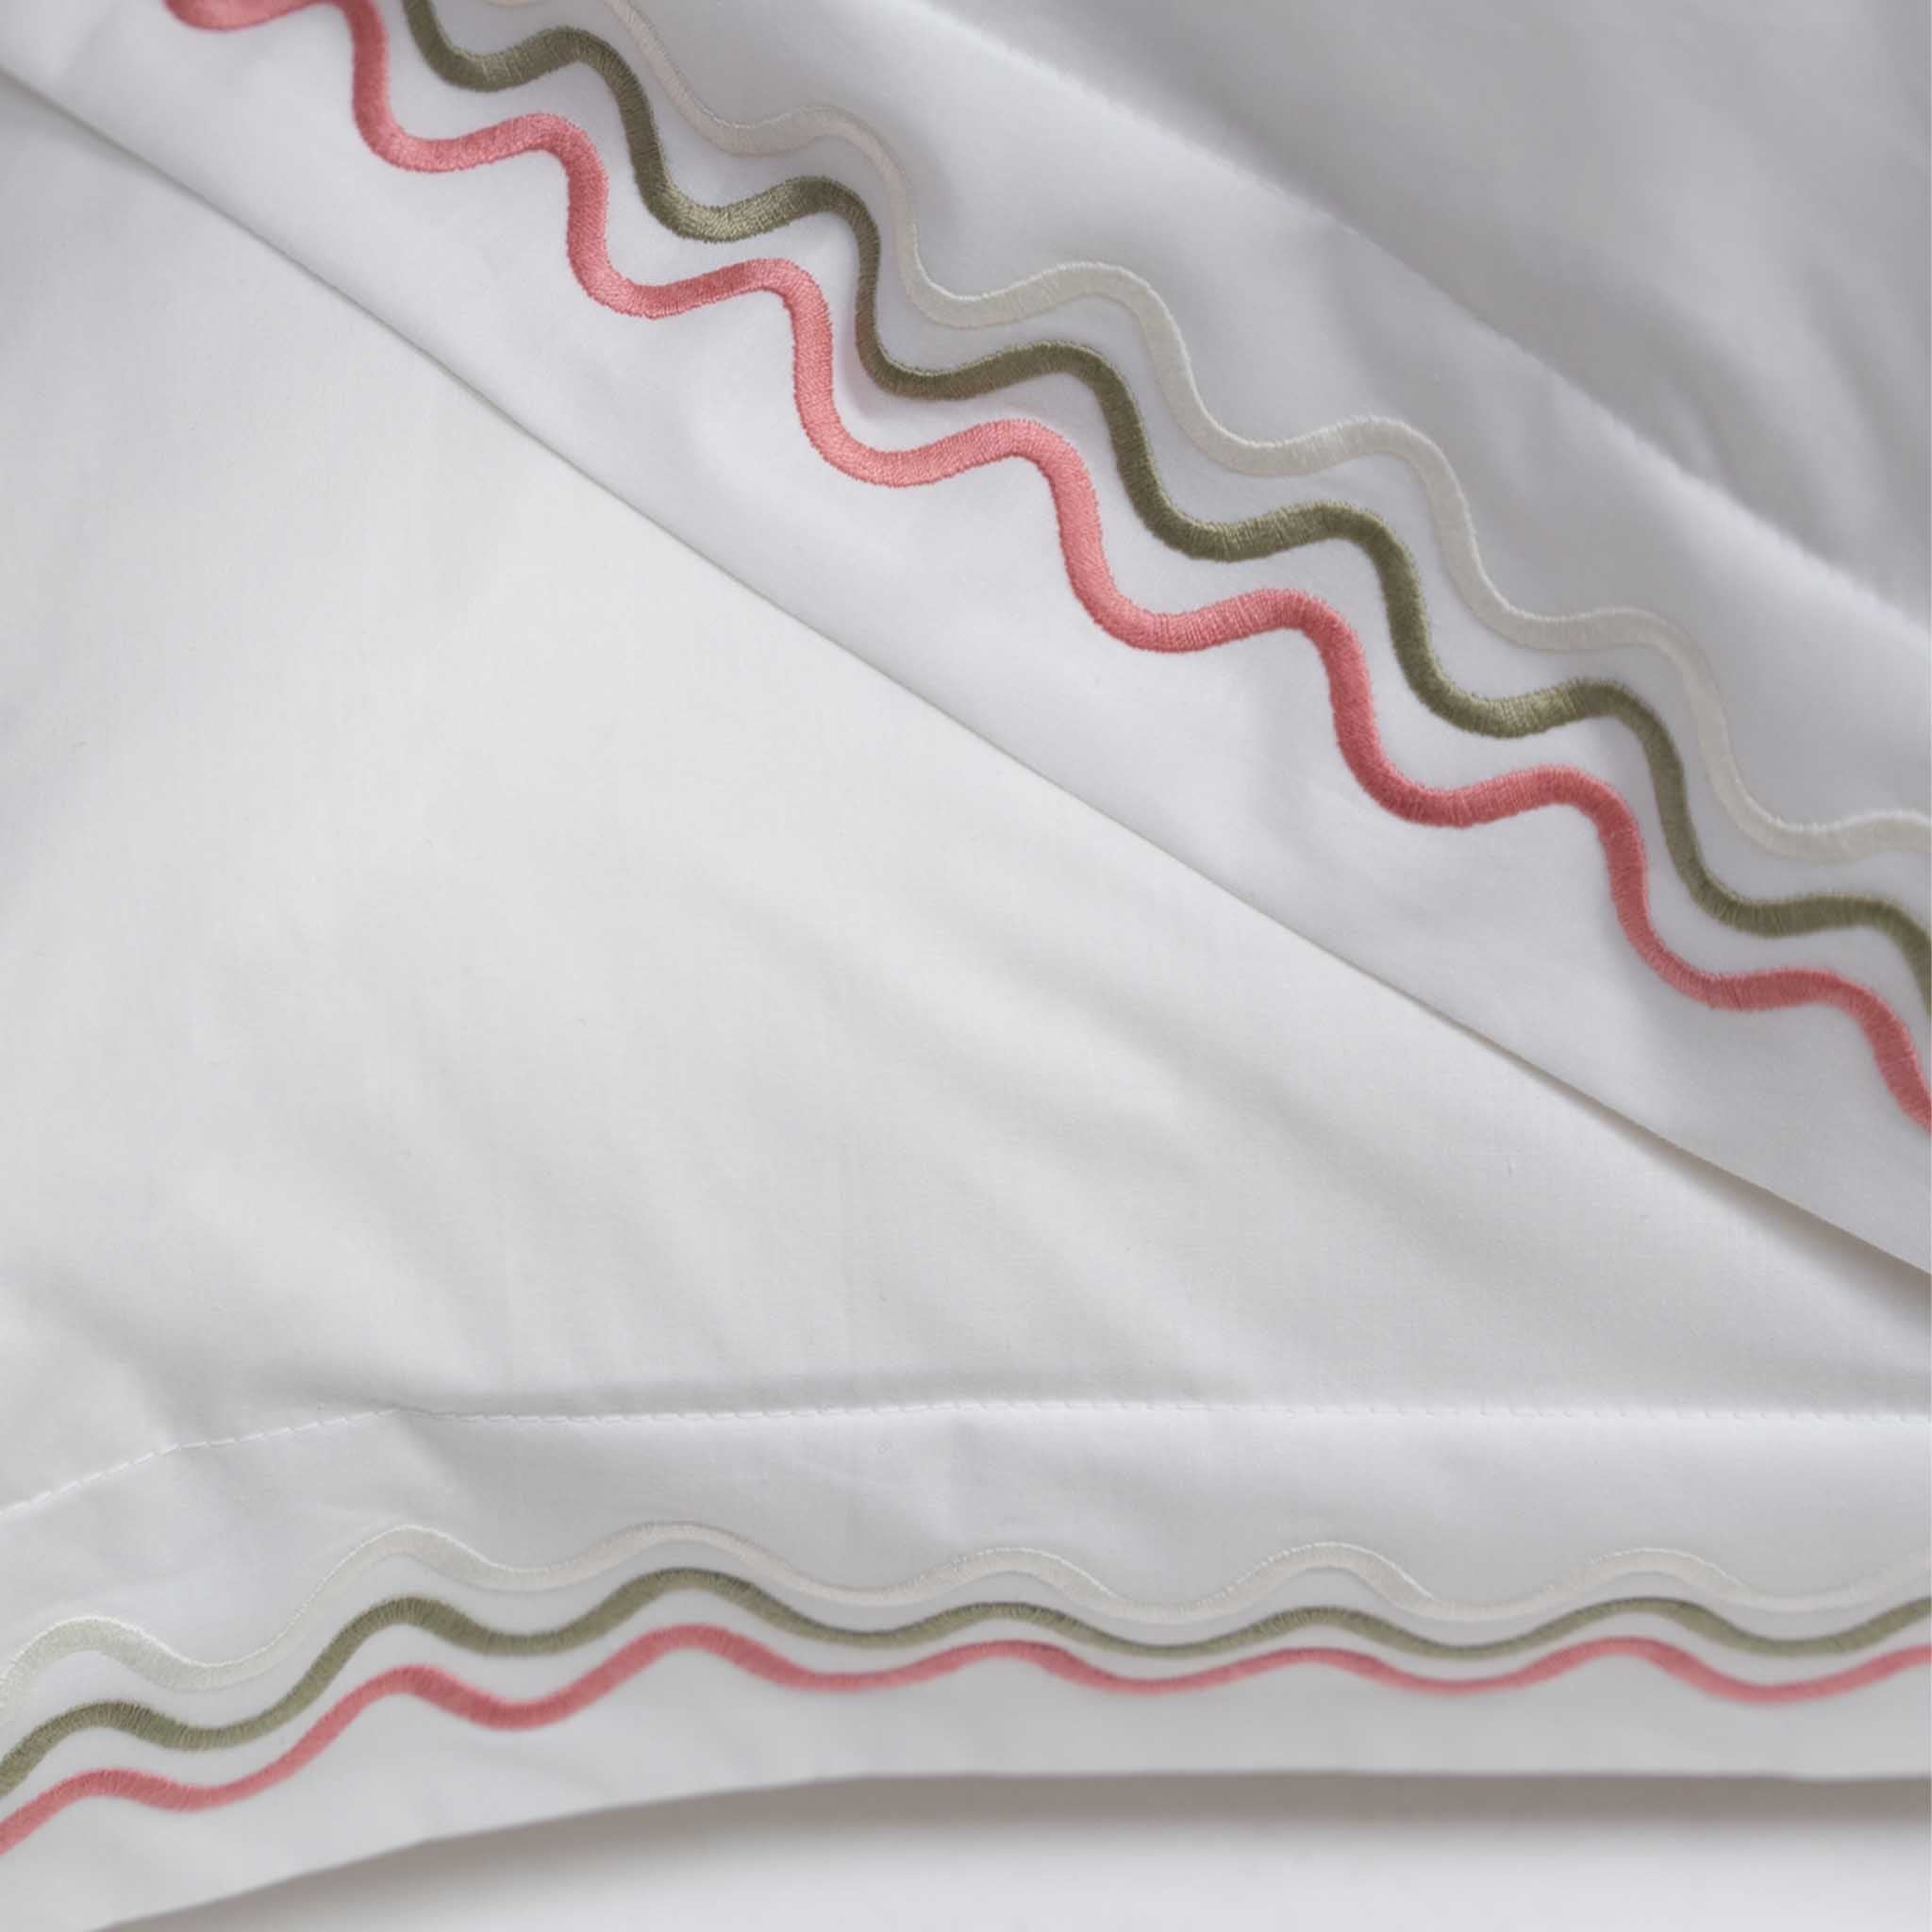 100% Egyptian Cotton Scalloped Luxury Bedding Set, Made in England by Peter Reed, Pink Embroidery